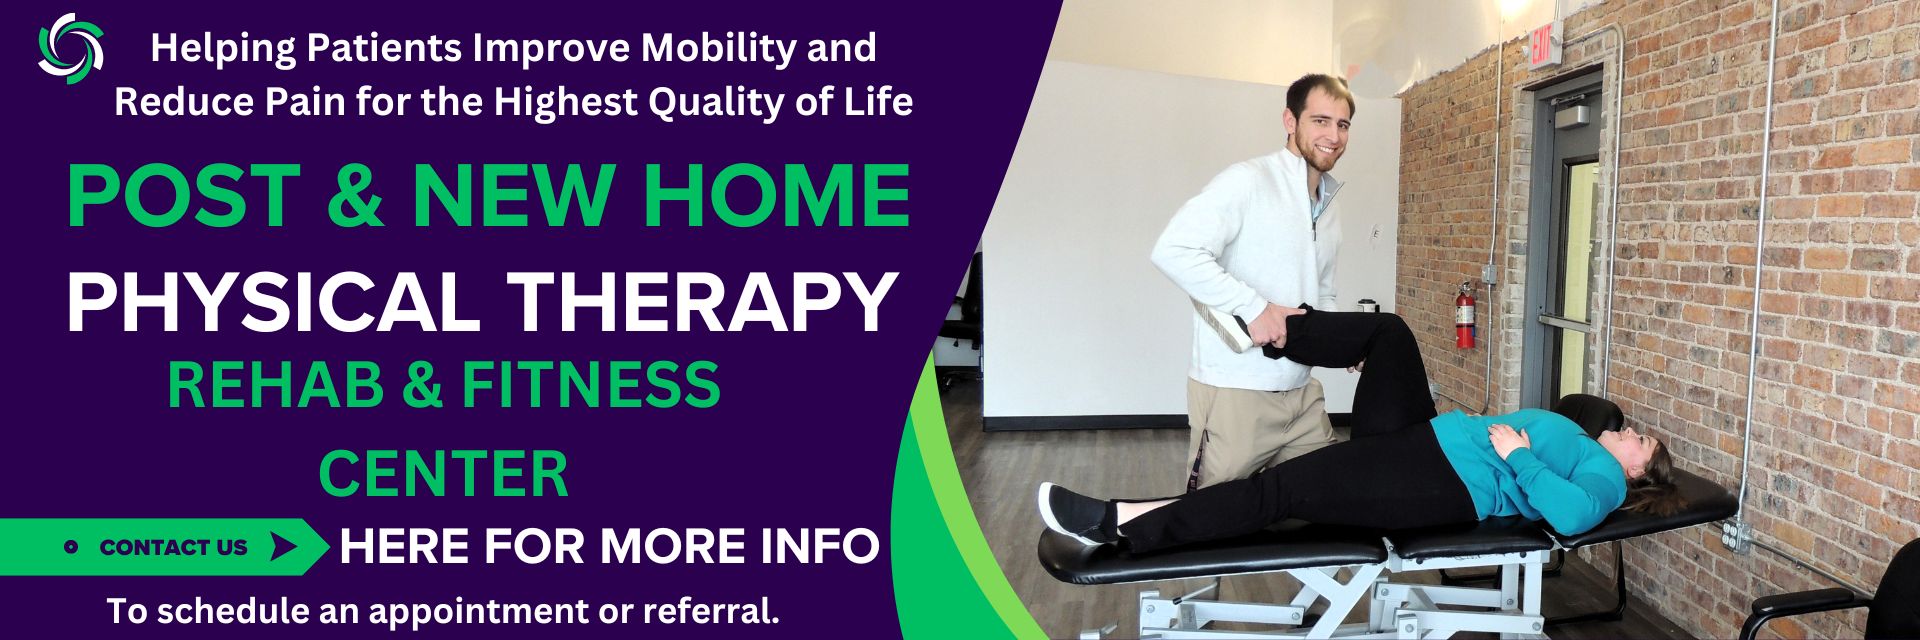 physical therapy, patient and therapist